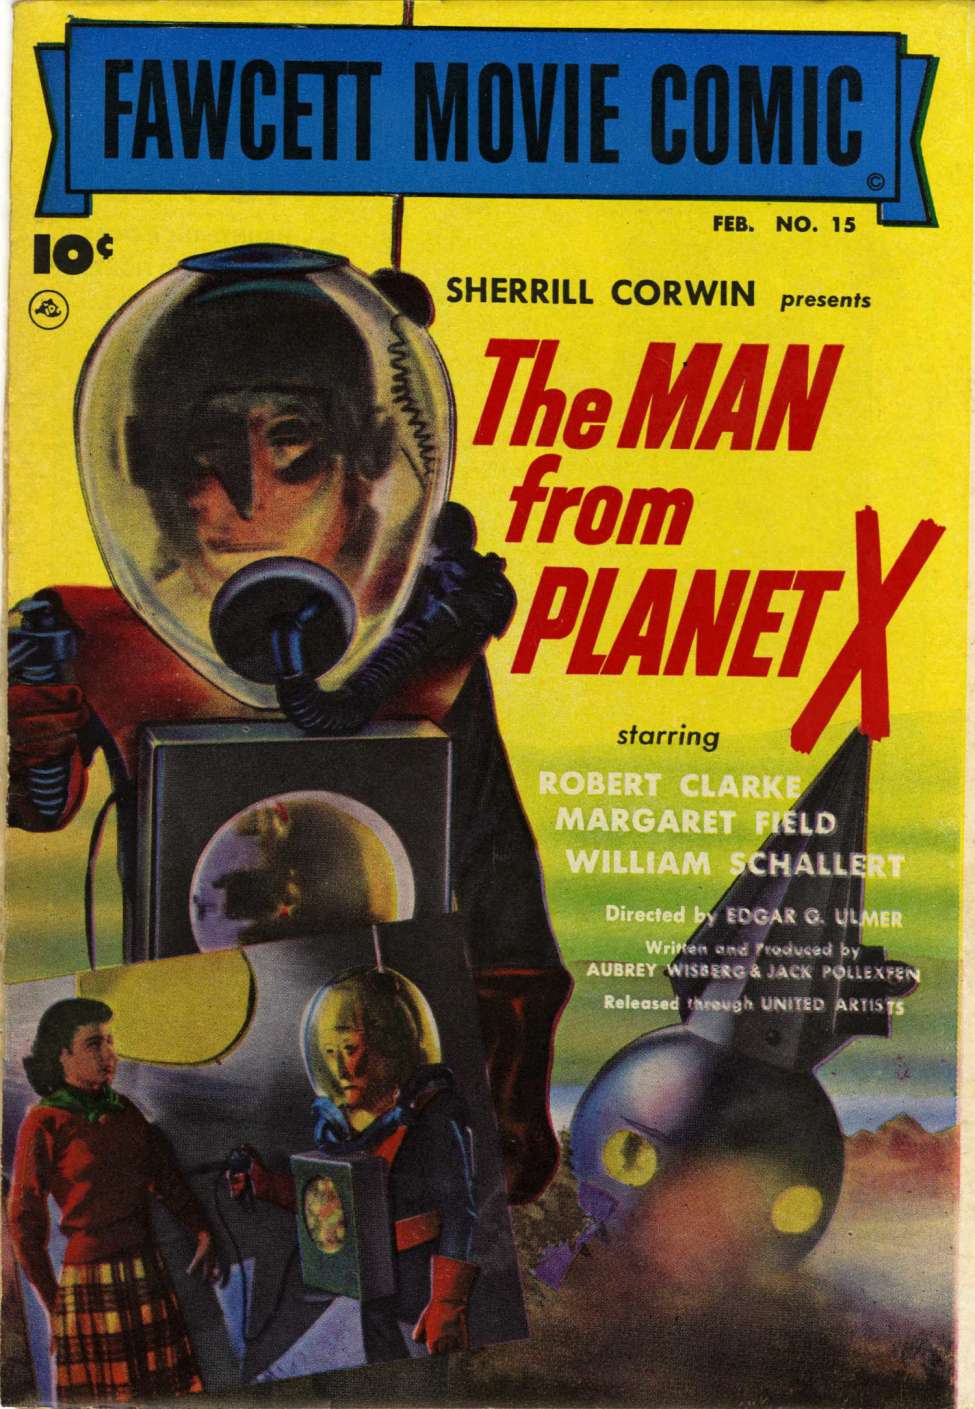 Comic Book Cover For Fawcett Movie Comic 15 - The Man from Planet X